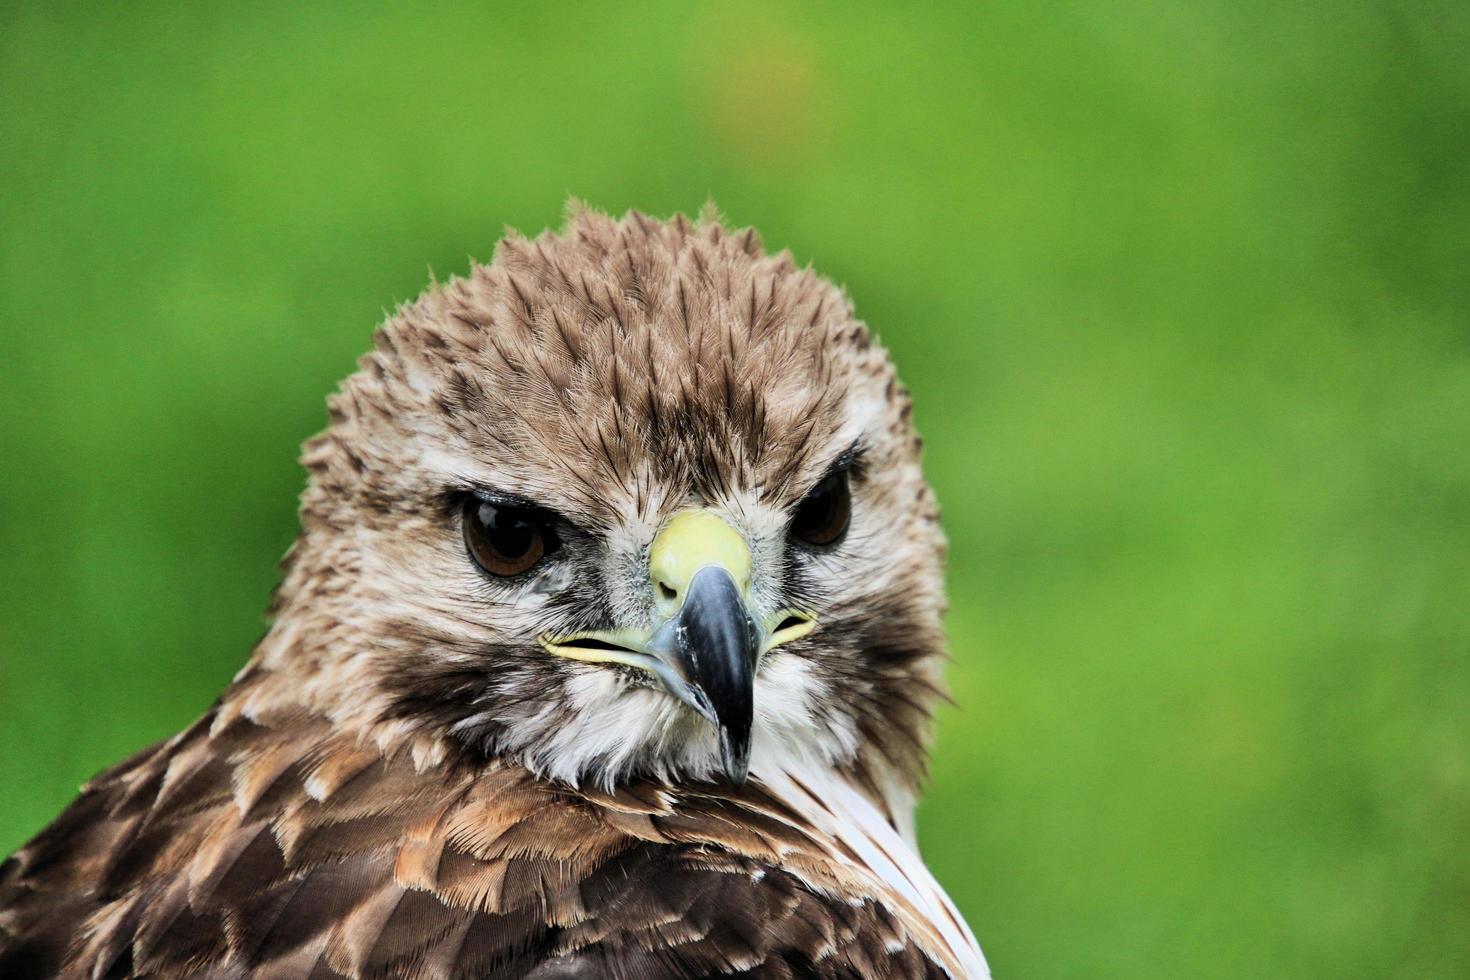 A close up of a Red Tailed Buzzard photo